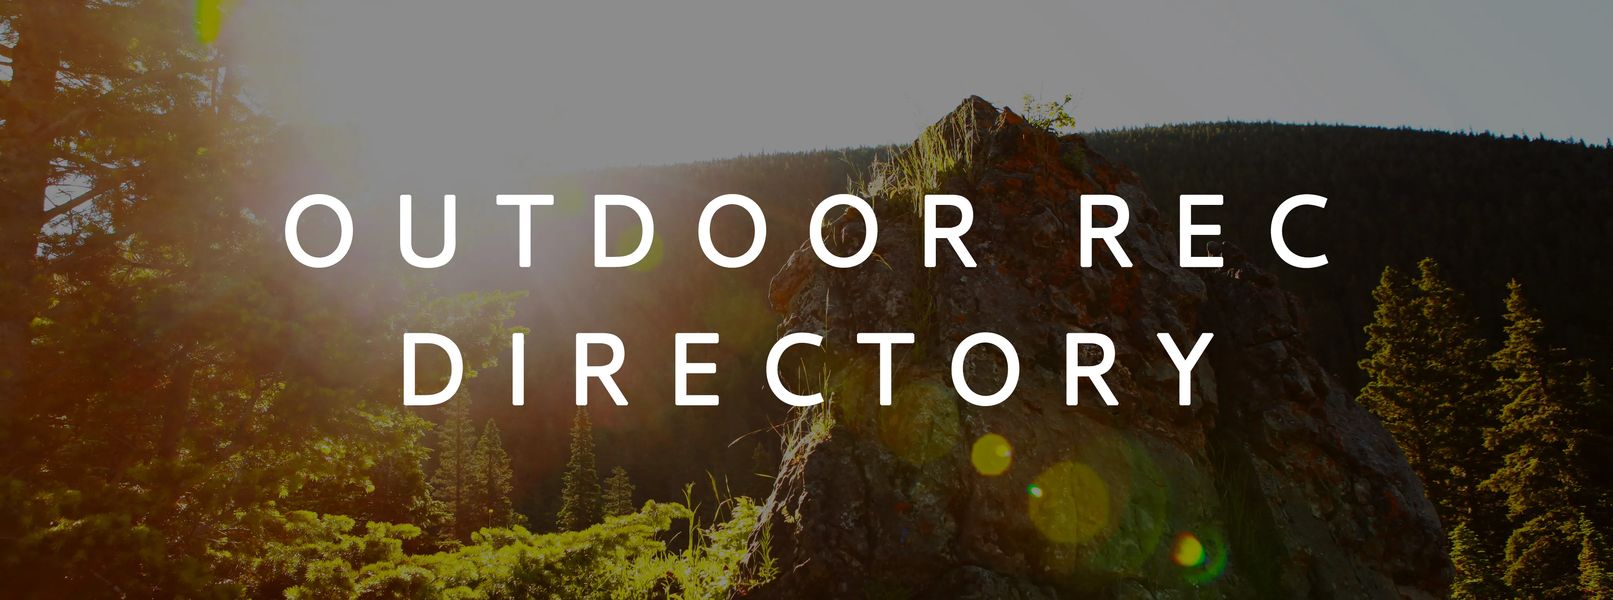 Outdoor Recreation in Central Montana Directory